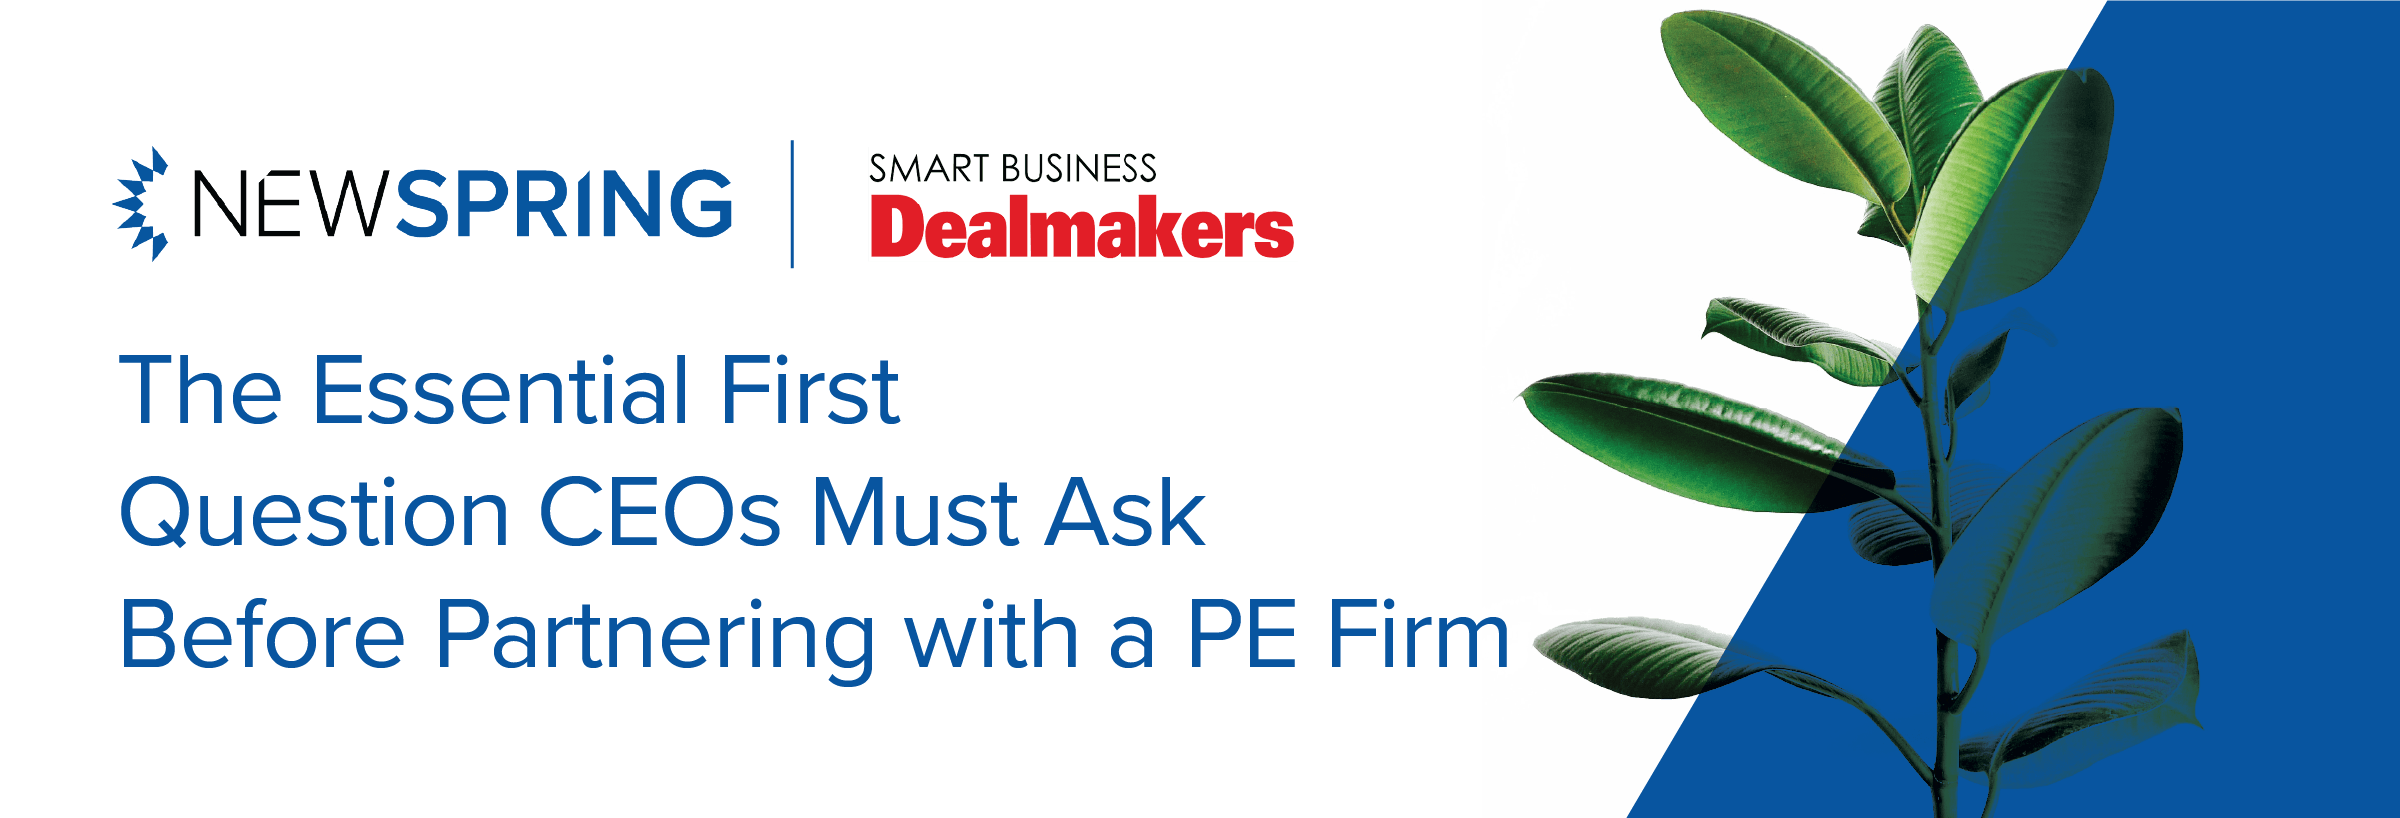 The Essential First Question CEOs Must Ask Before Partnering with a PE Firm